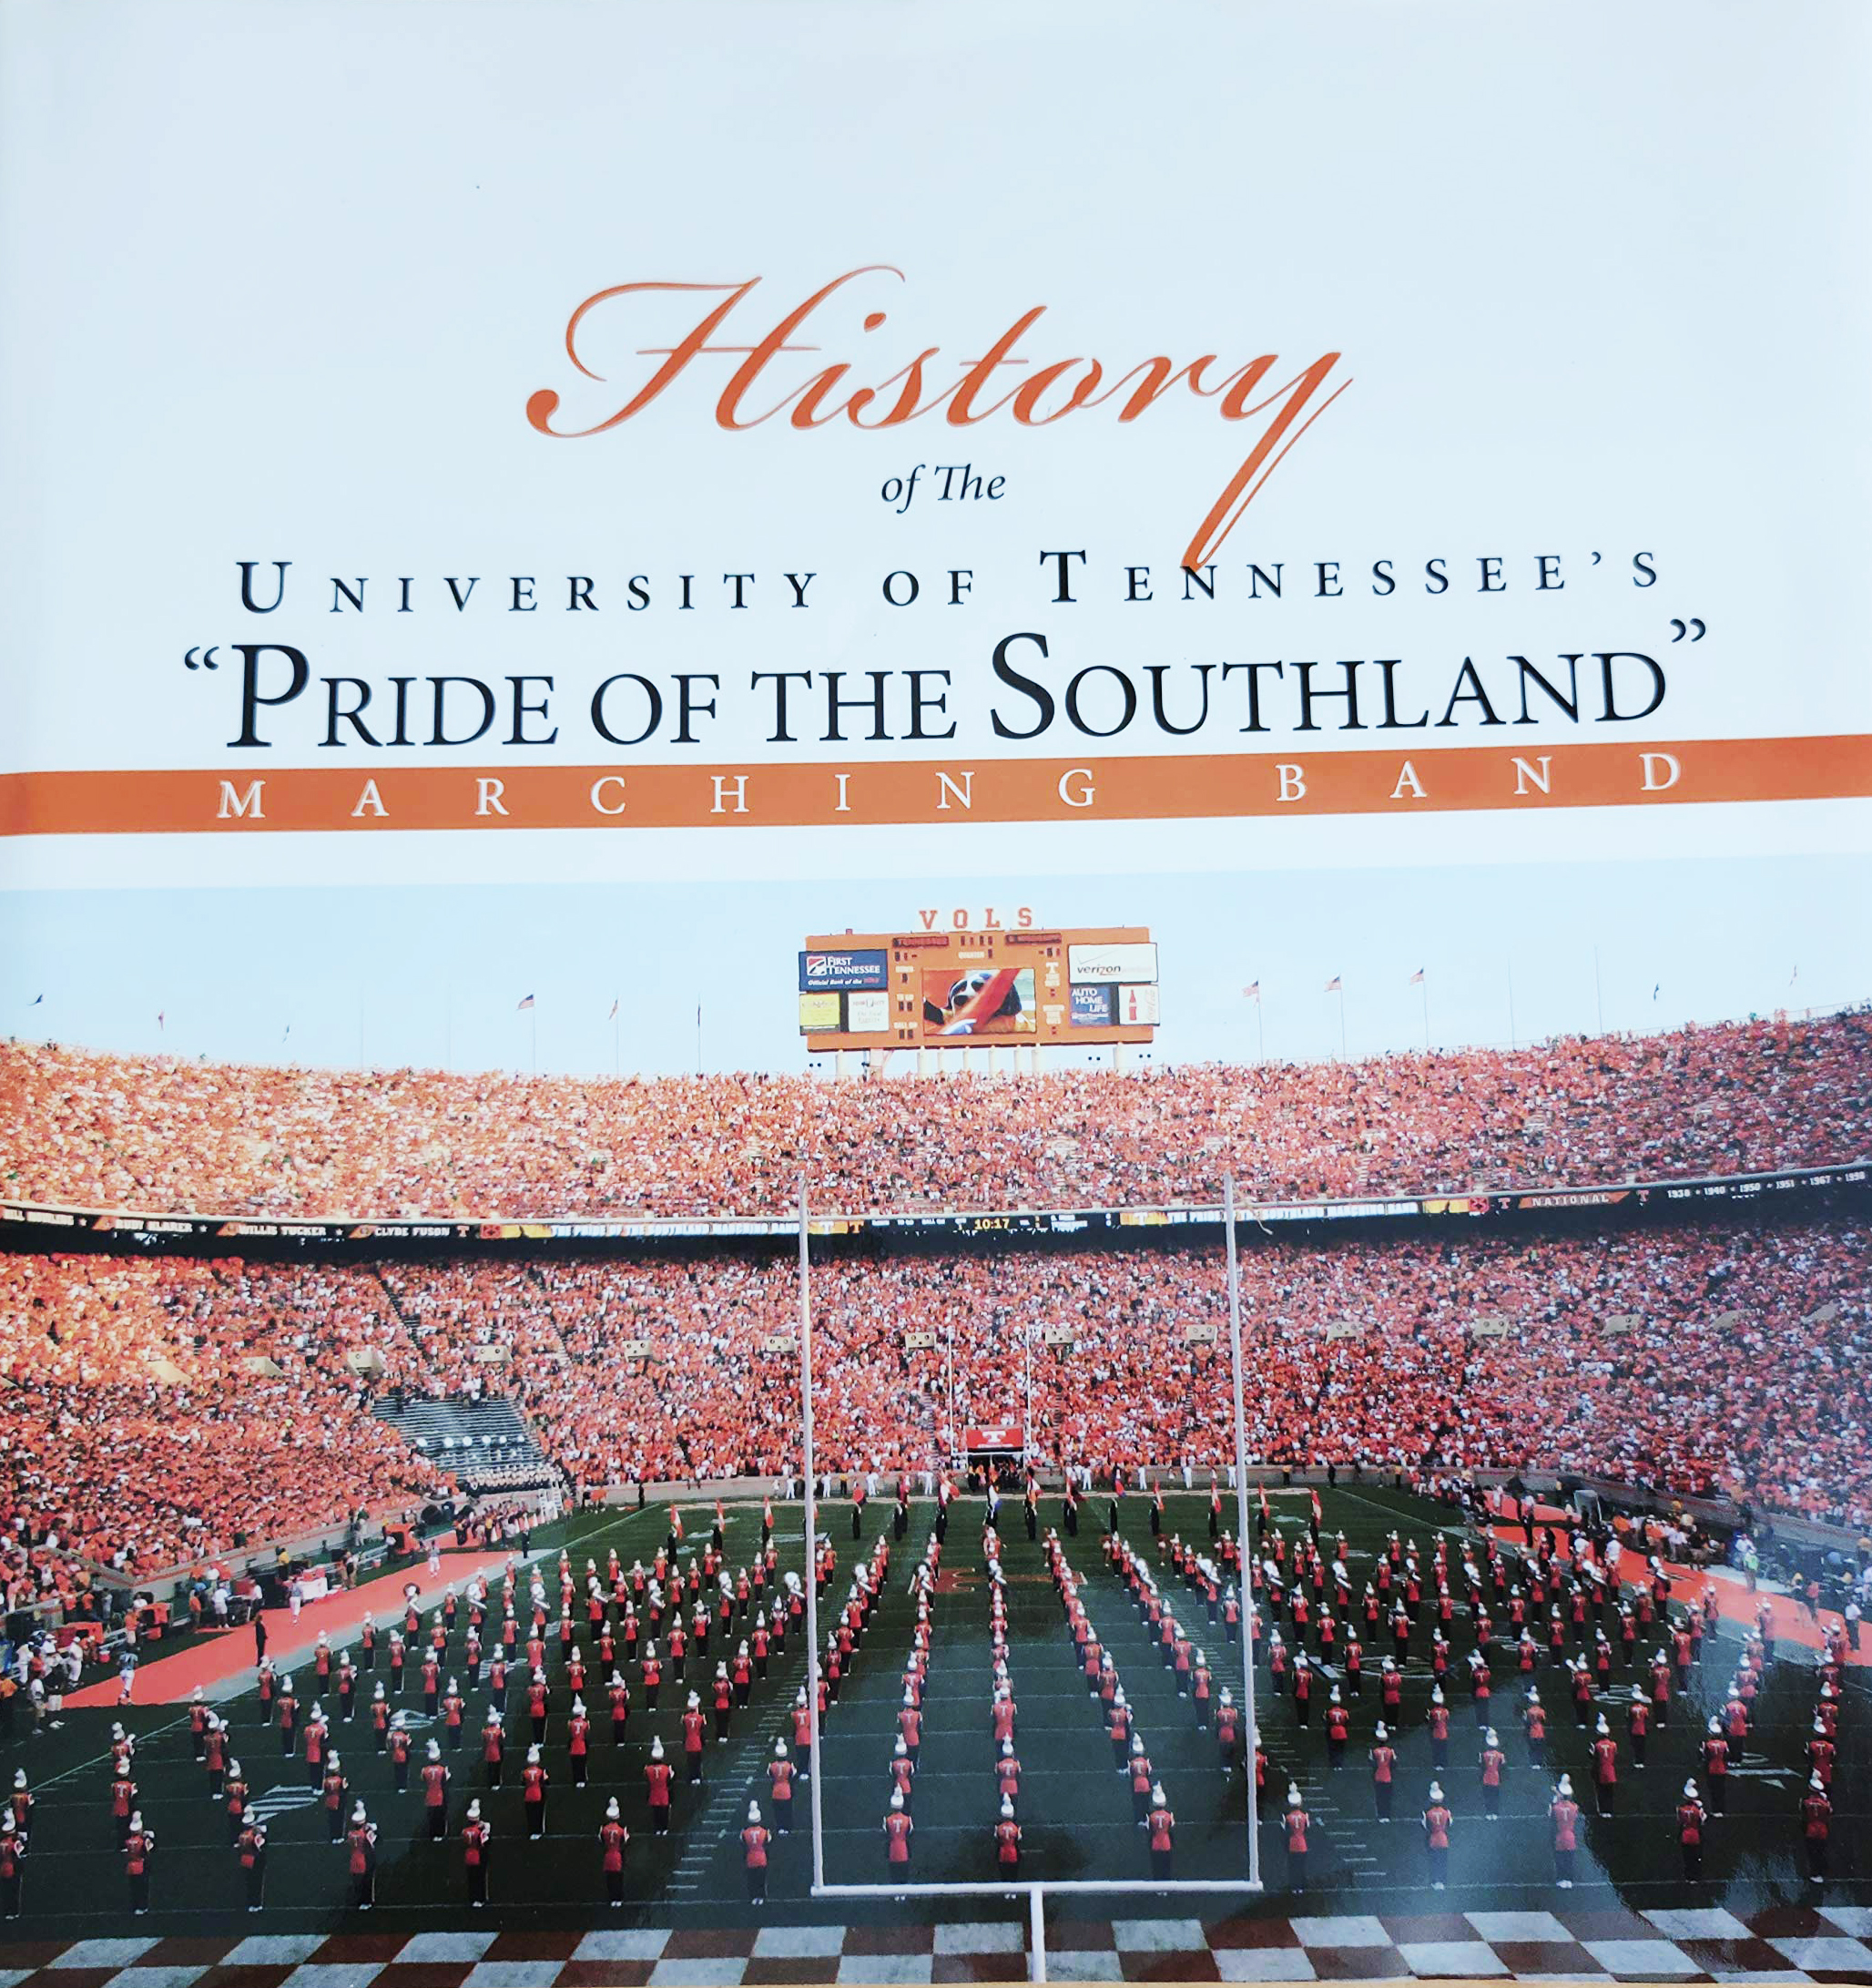 The History of The University of Tennessee's "Pride of the Southland" marching